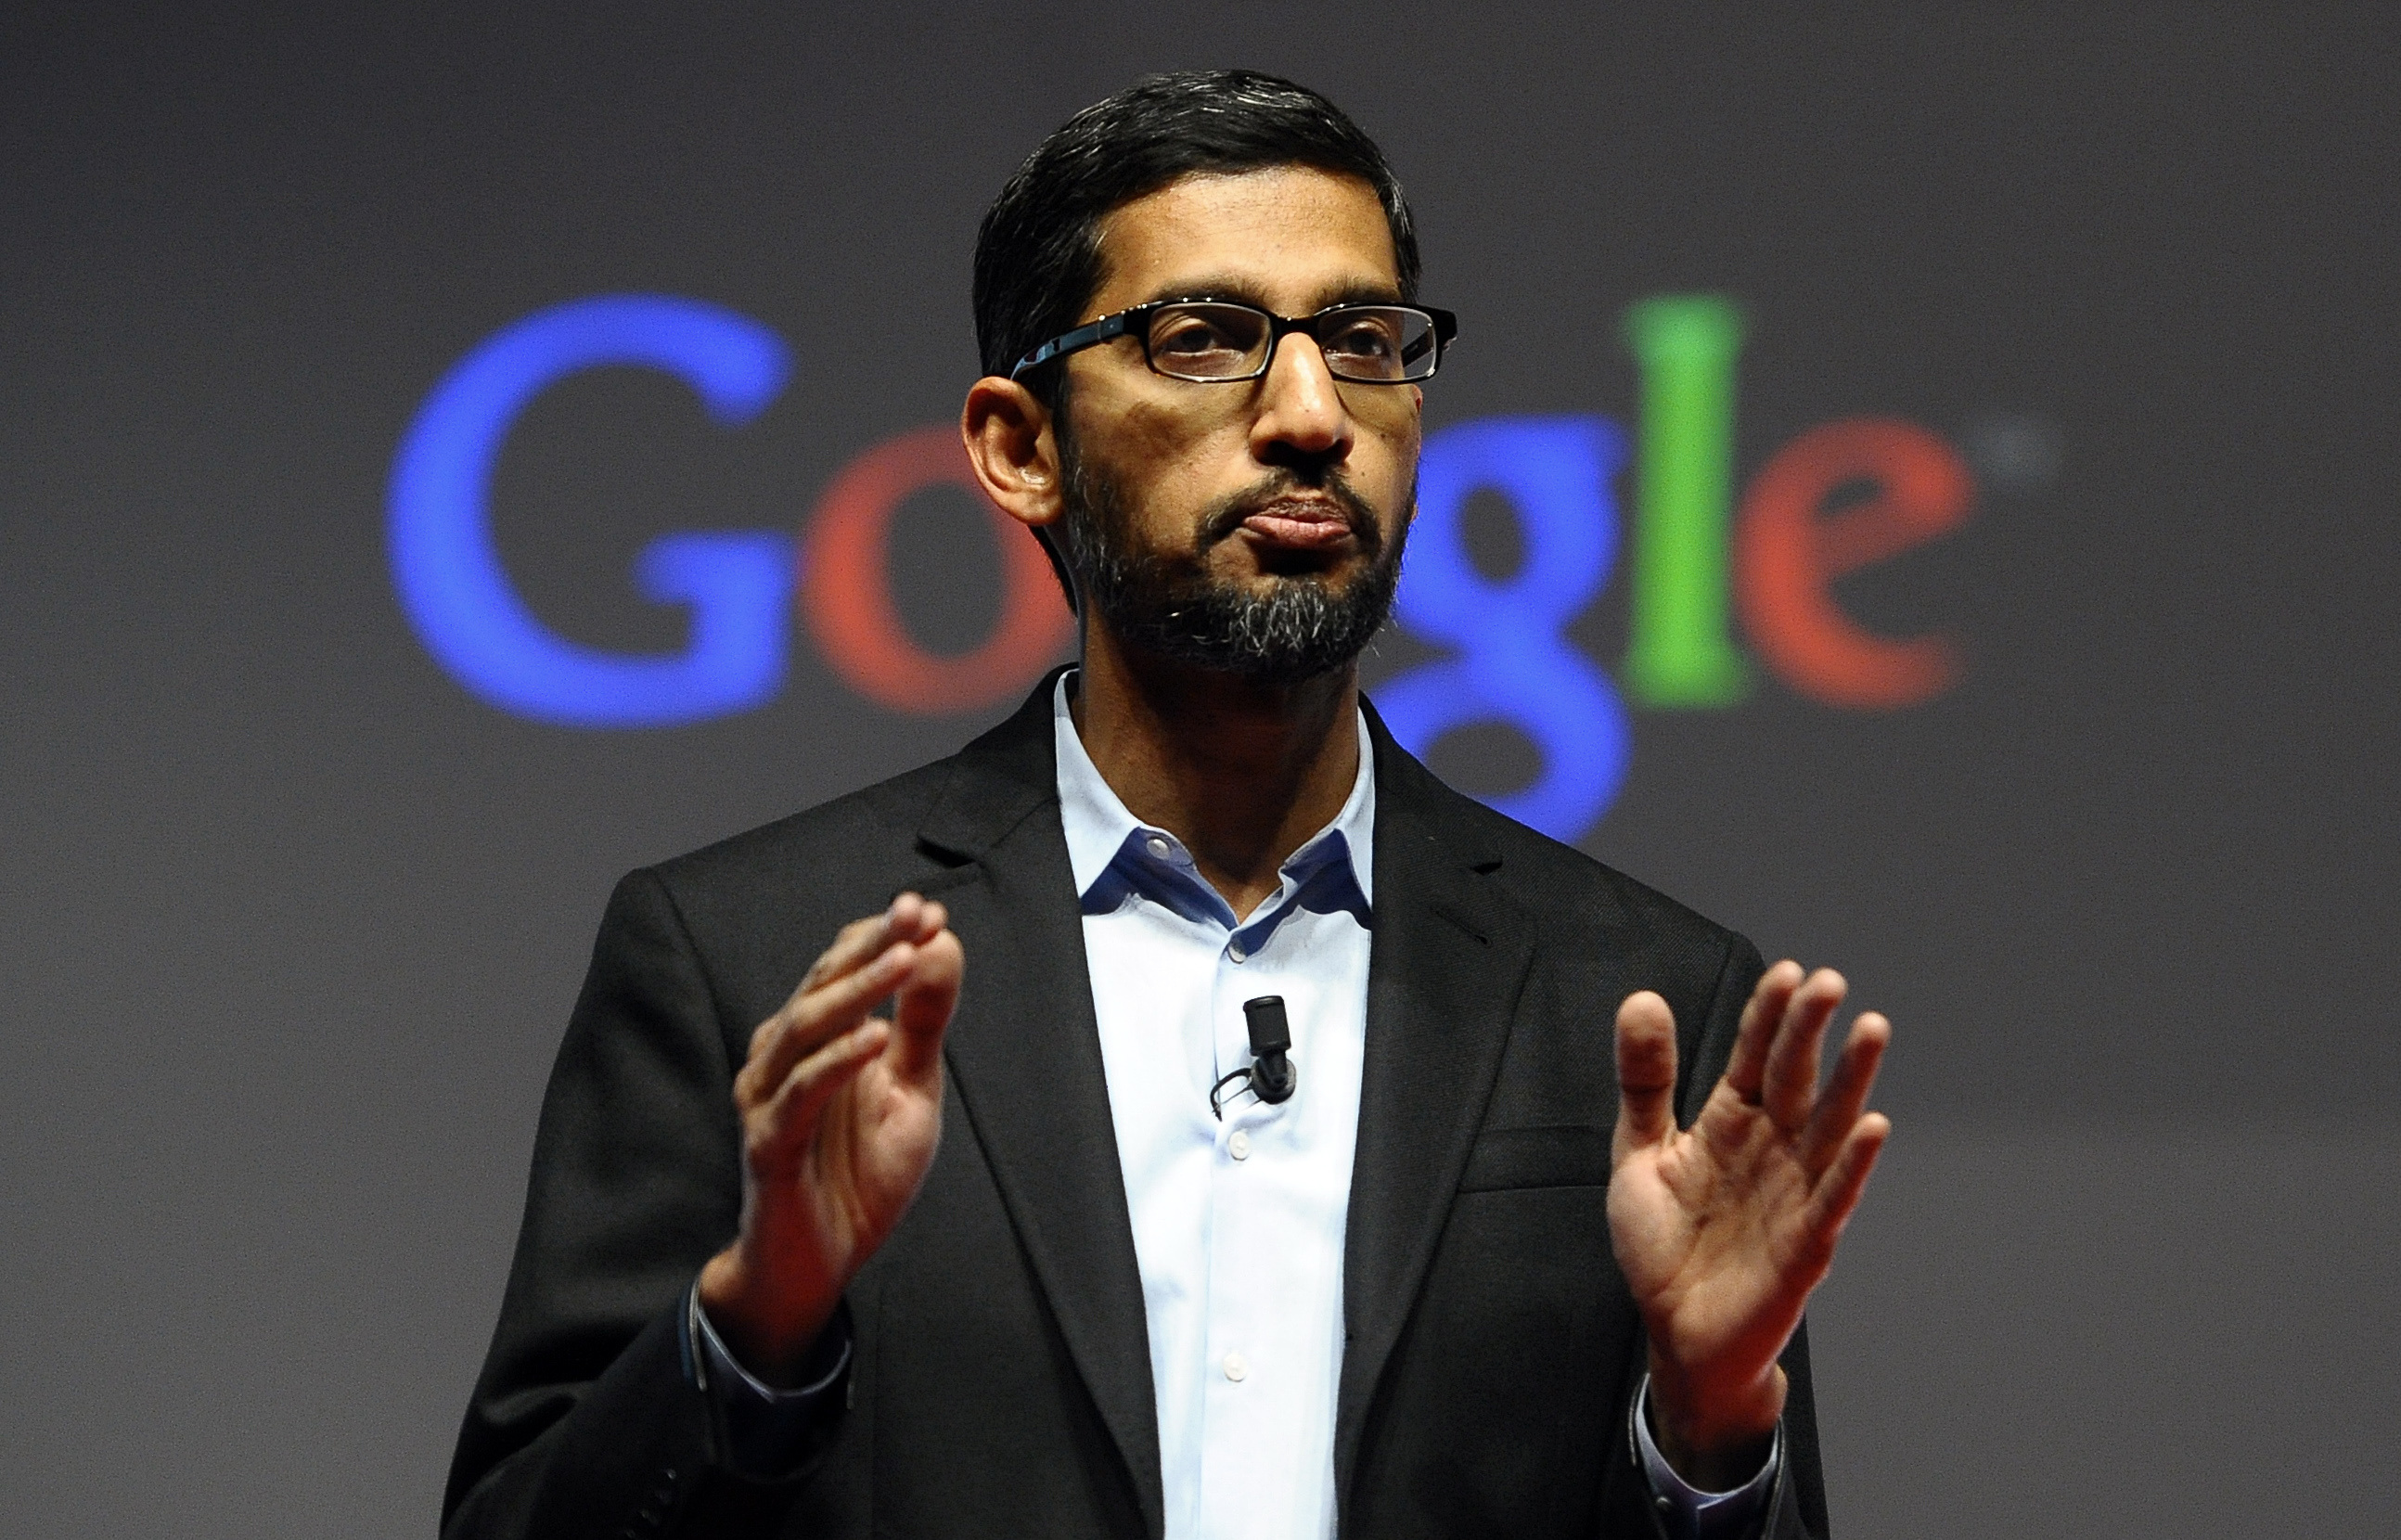 Google’s Pichai offers internet training for small Indian companies